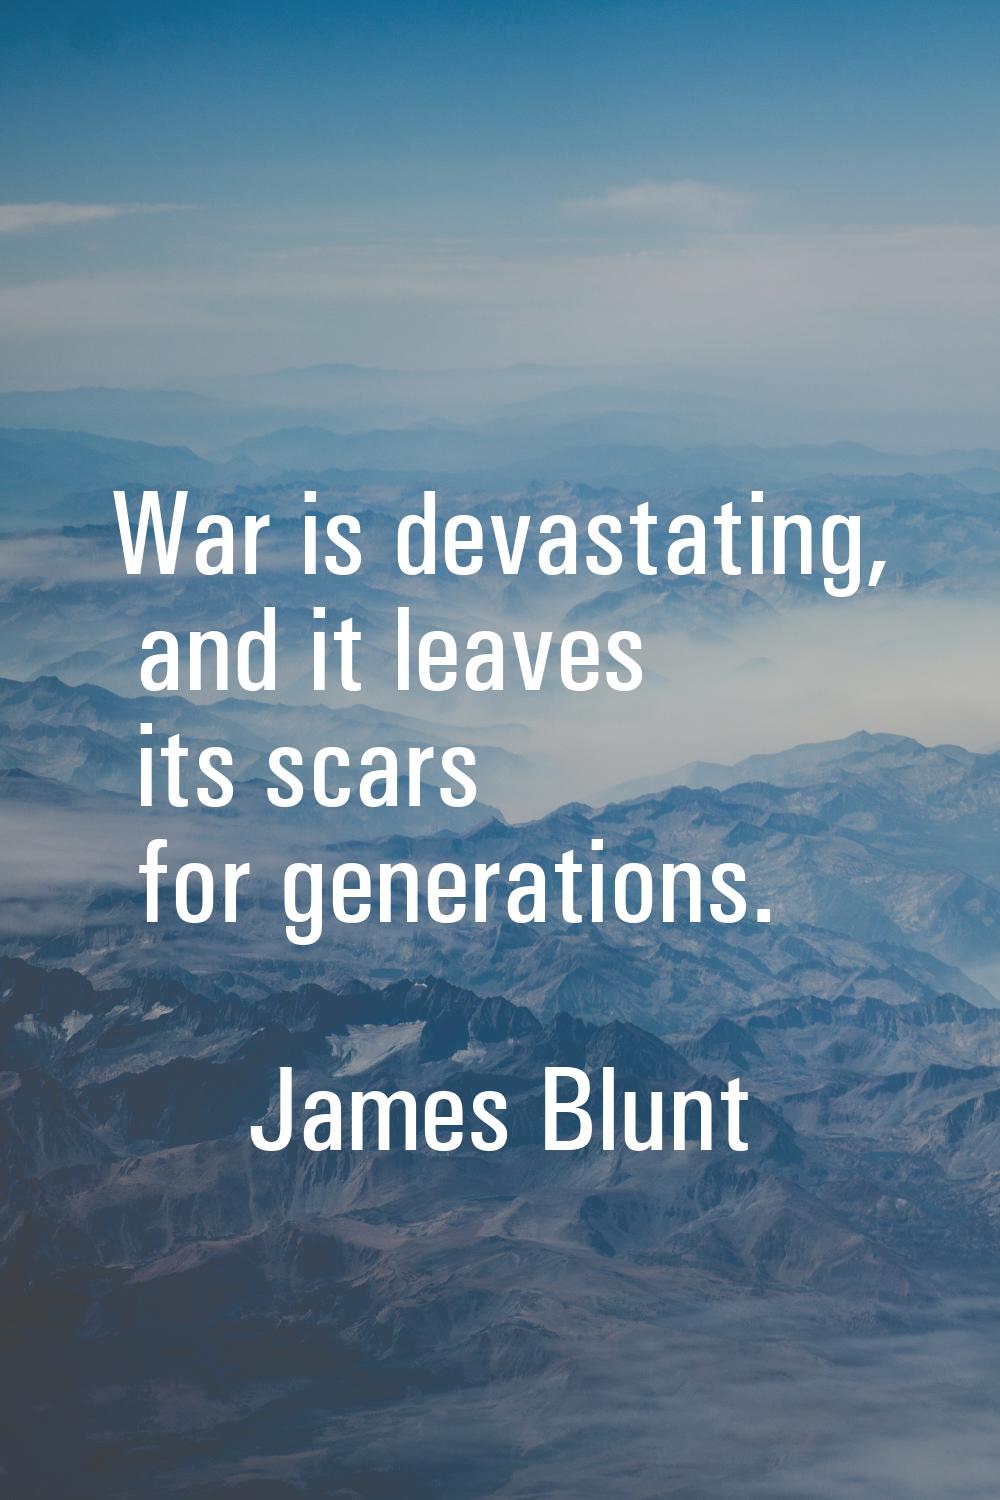 War is devastating, and it leaves its scars for generations.